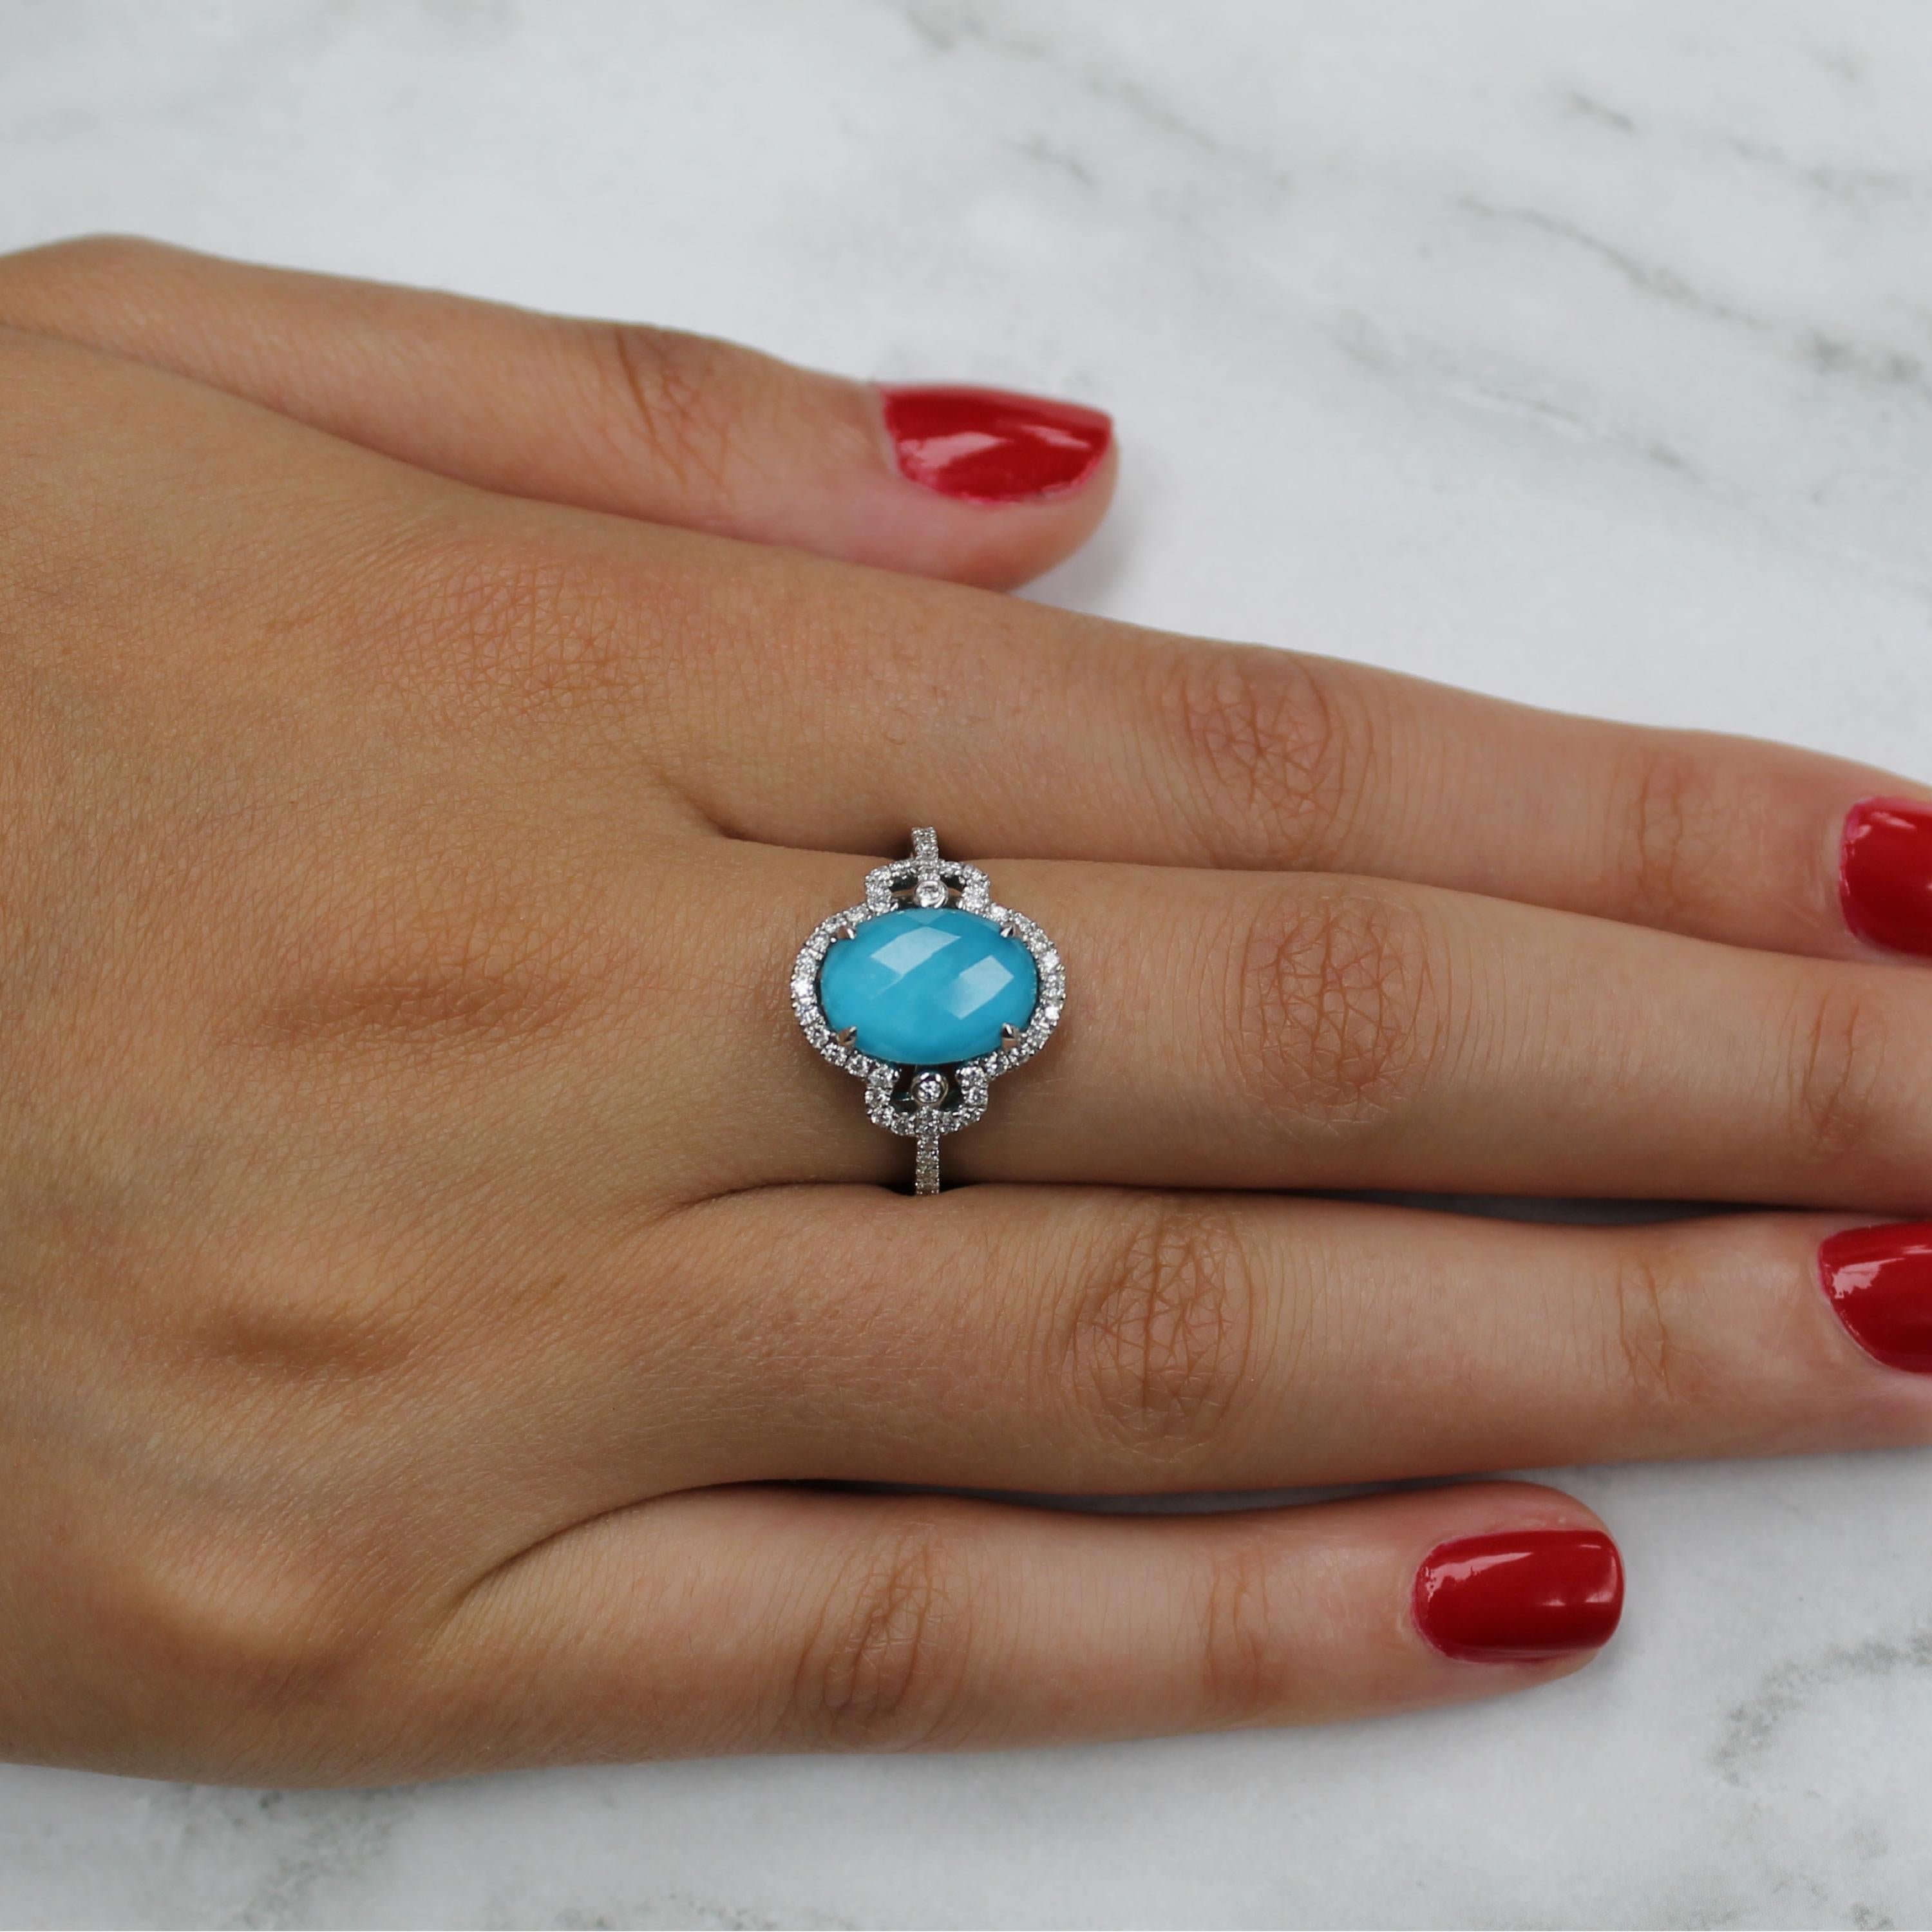 St. Barths Blue Ring featuring an oval, checker-cut, White Topaz layered with Natural Arizona Turquoise, surrounded by diamonds. The St. Barths Blue collection from Doves by Doron Paloma takes you to the crystal clear, turquoise waters of the French